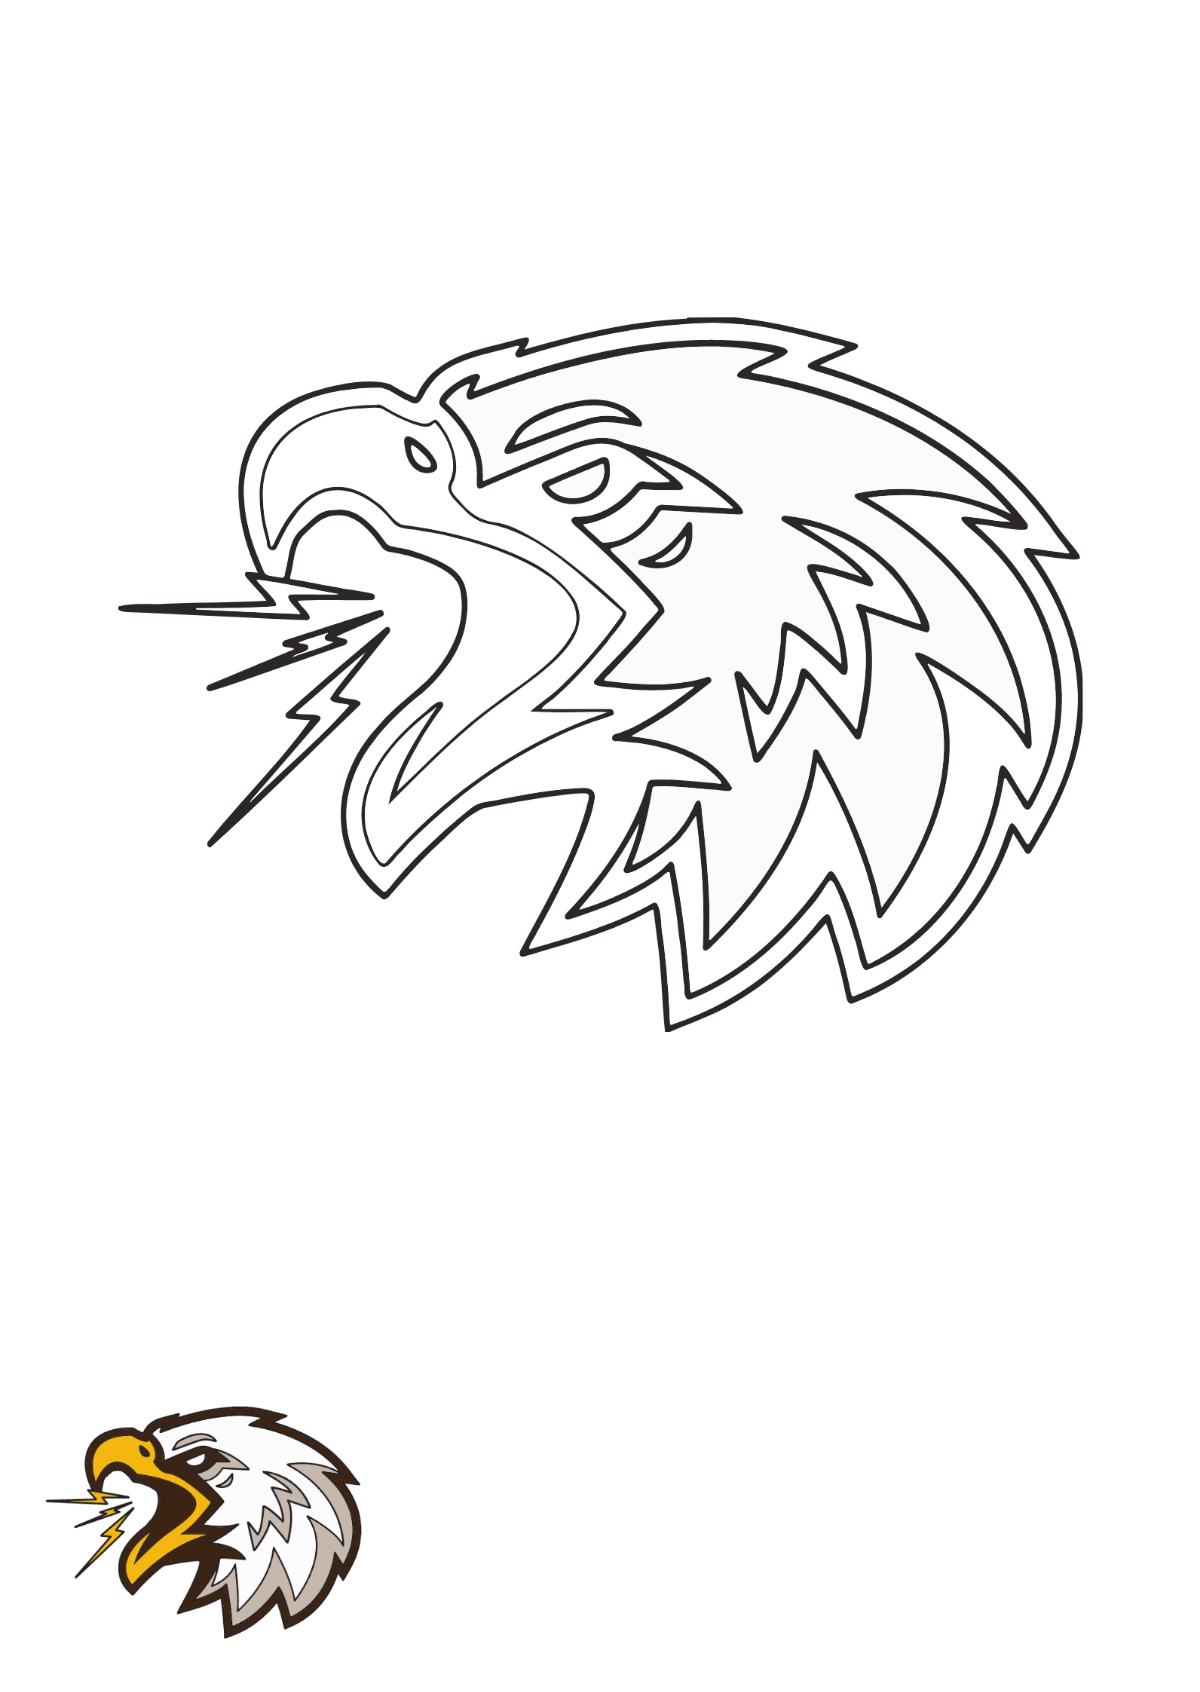 Screaming Eagle coloring page Template